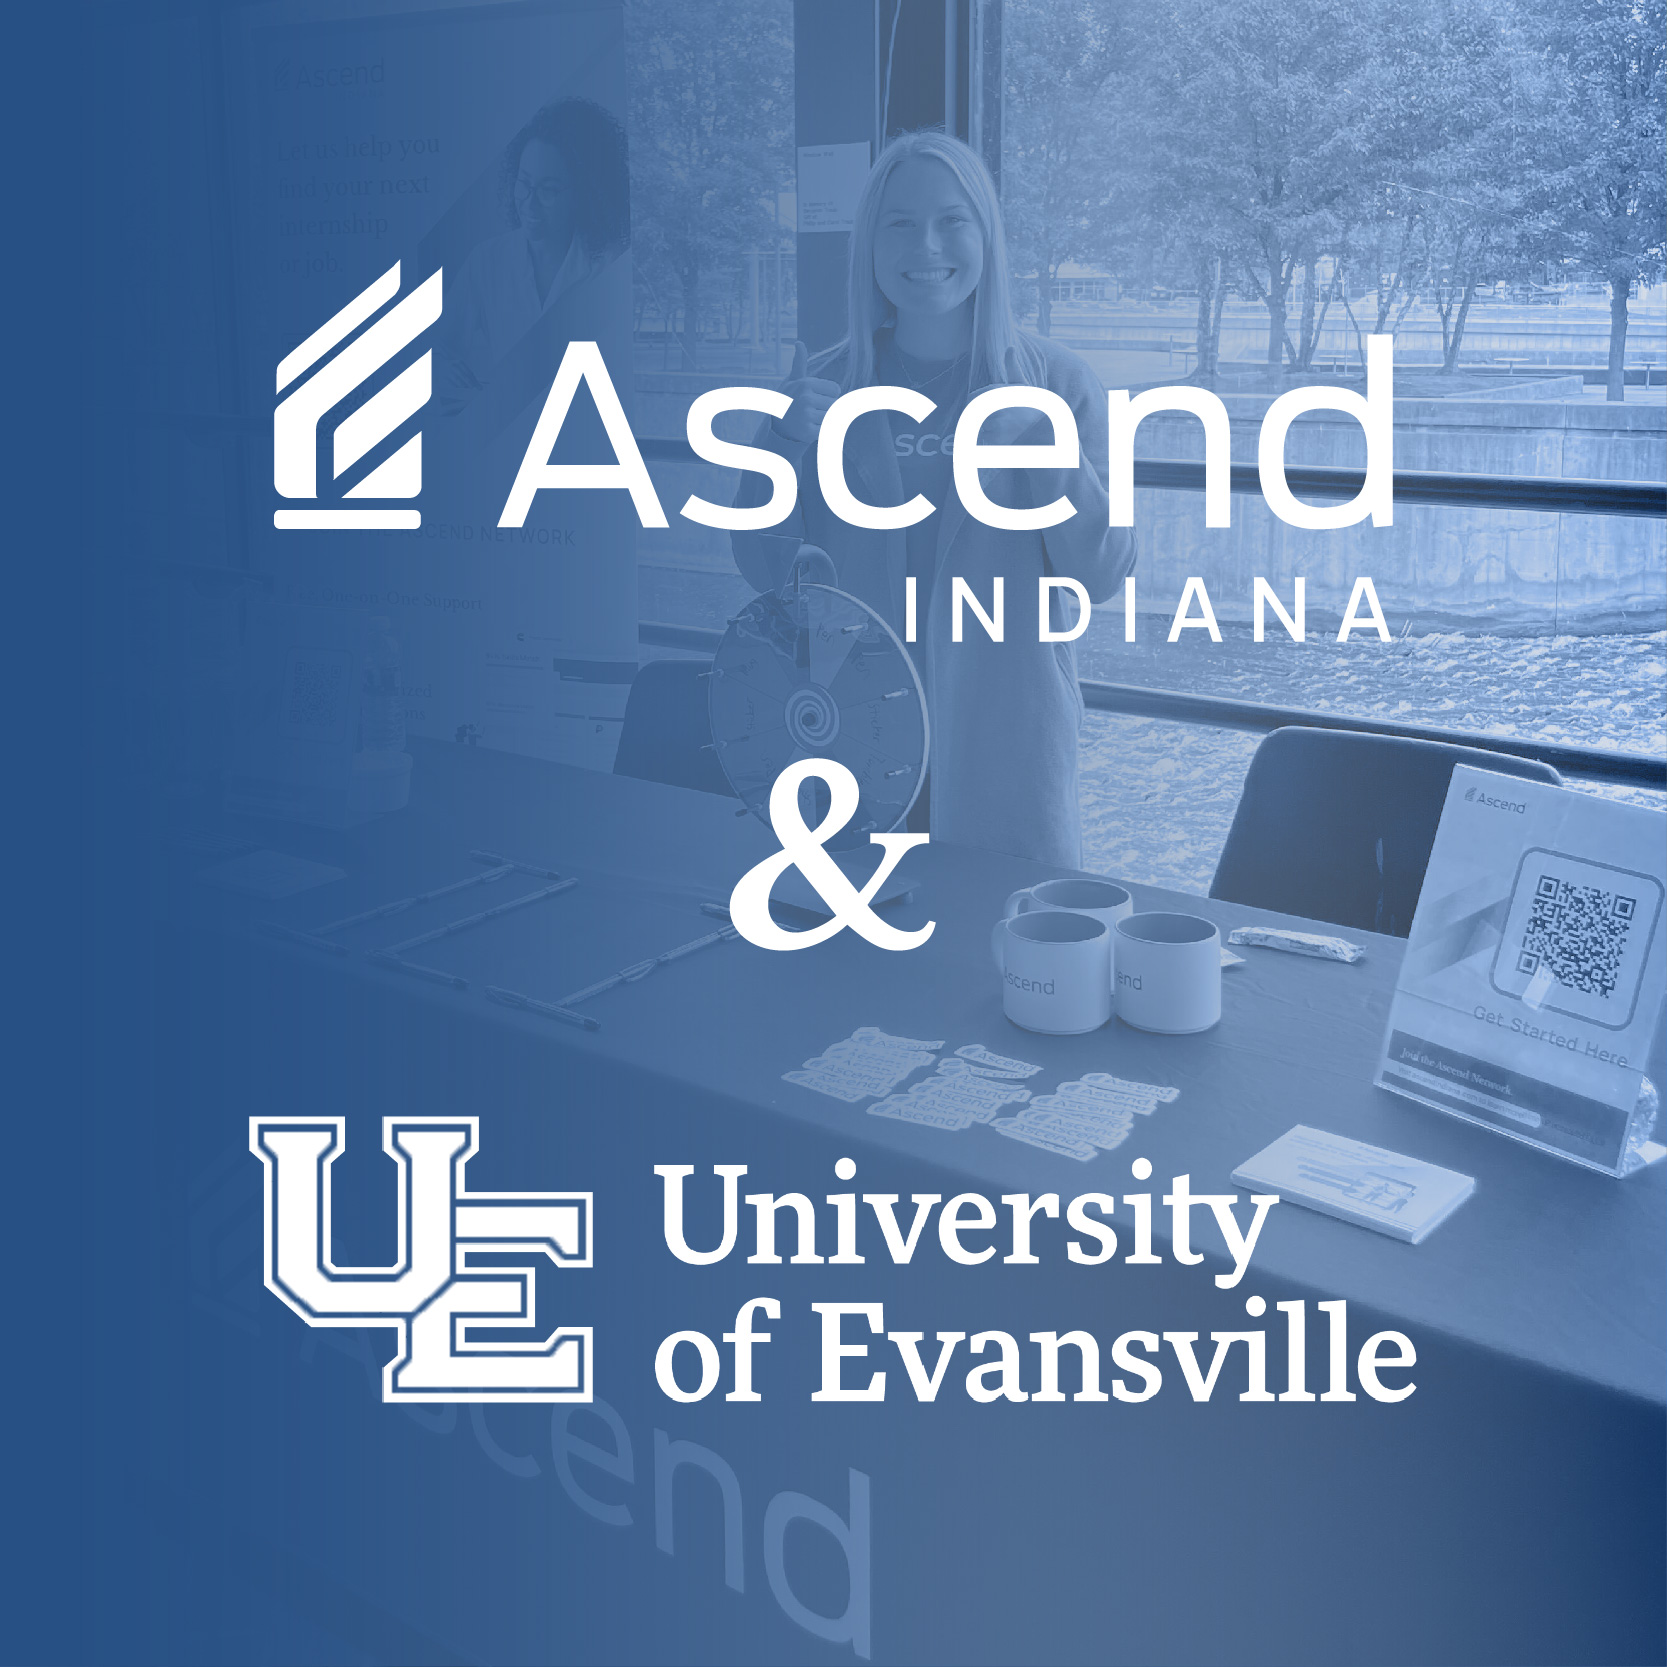 University of Evansville partners with Ascend Indiana to help students with career and internship searches while providing one-on-one support